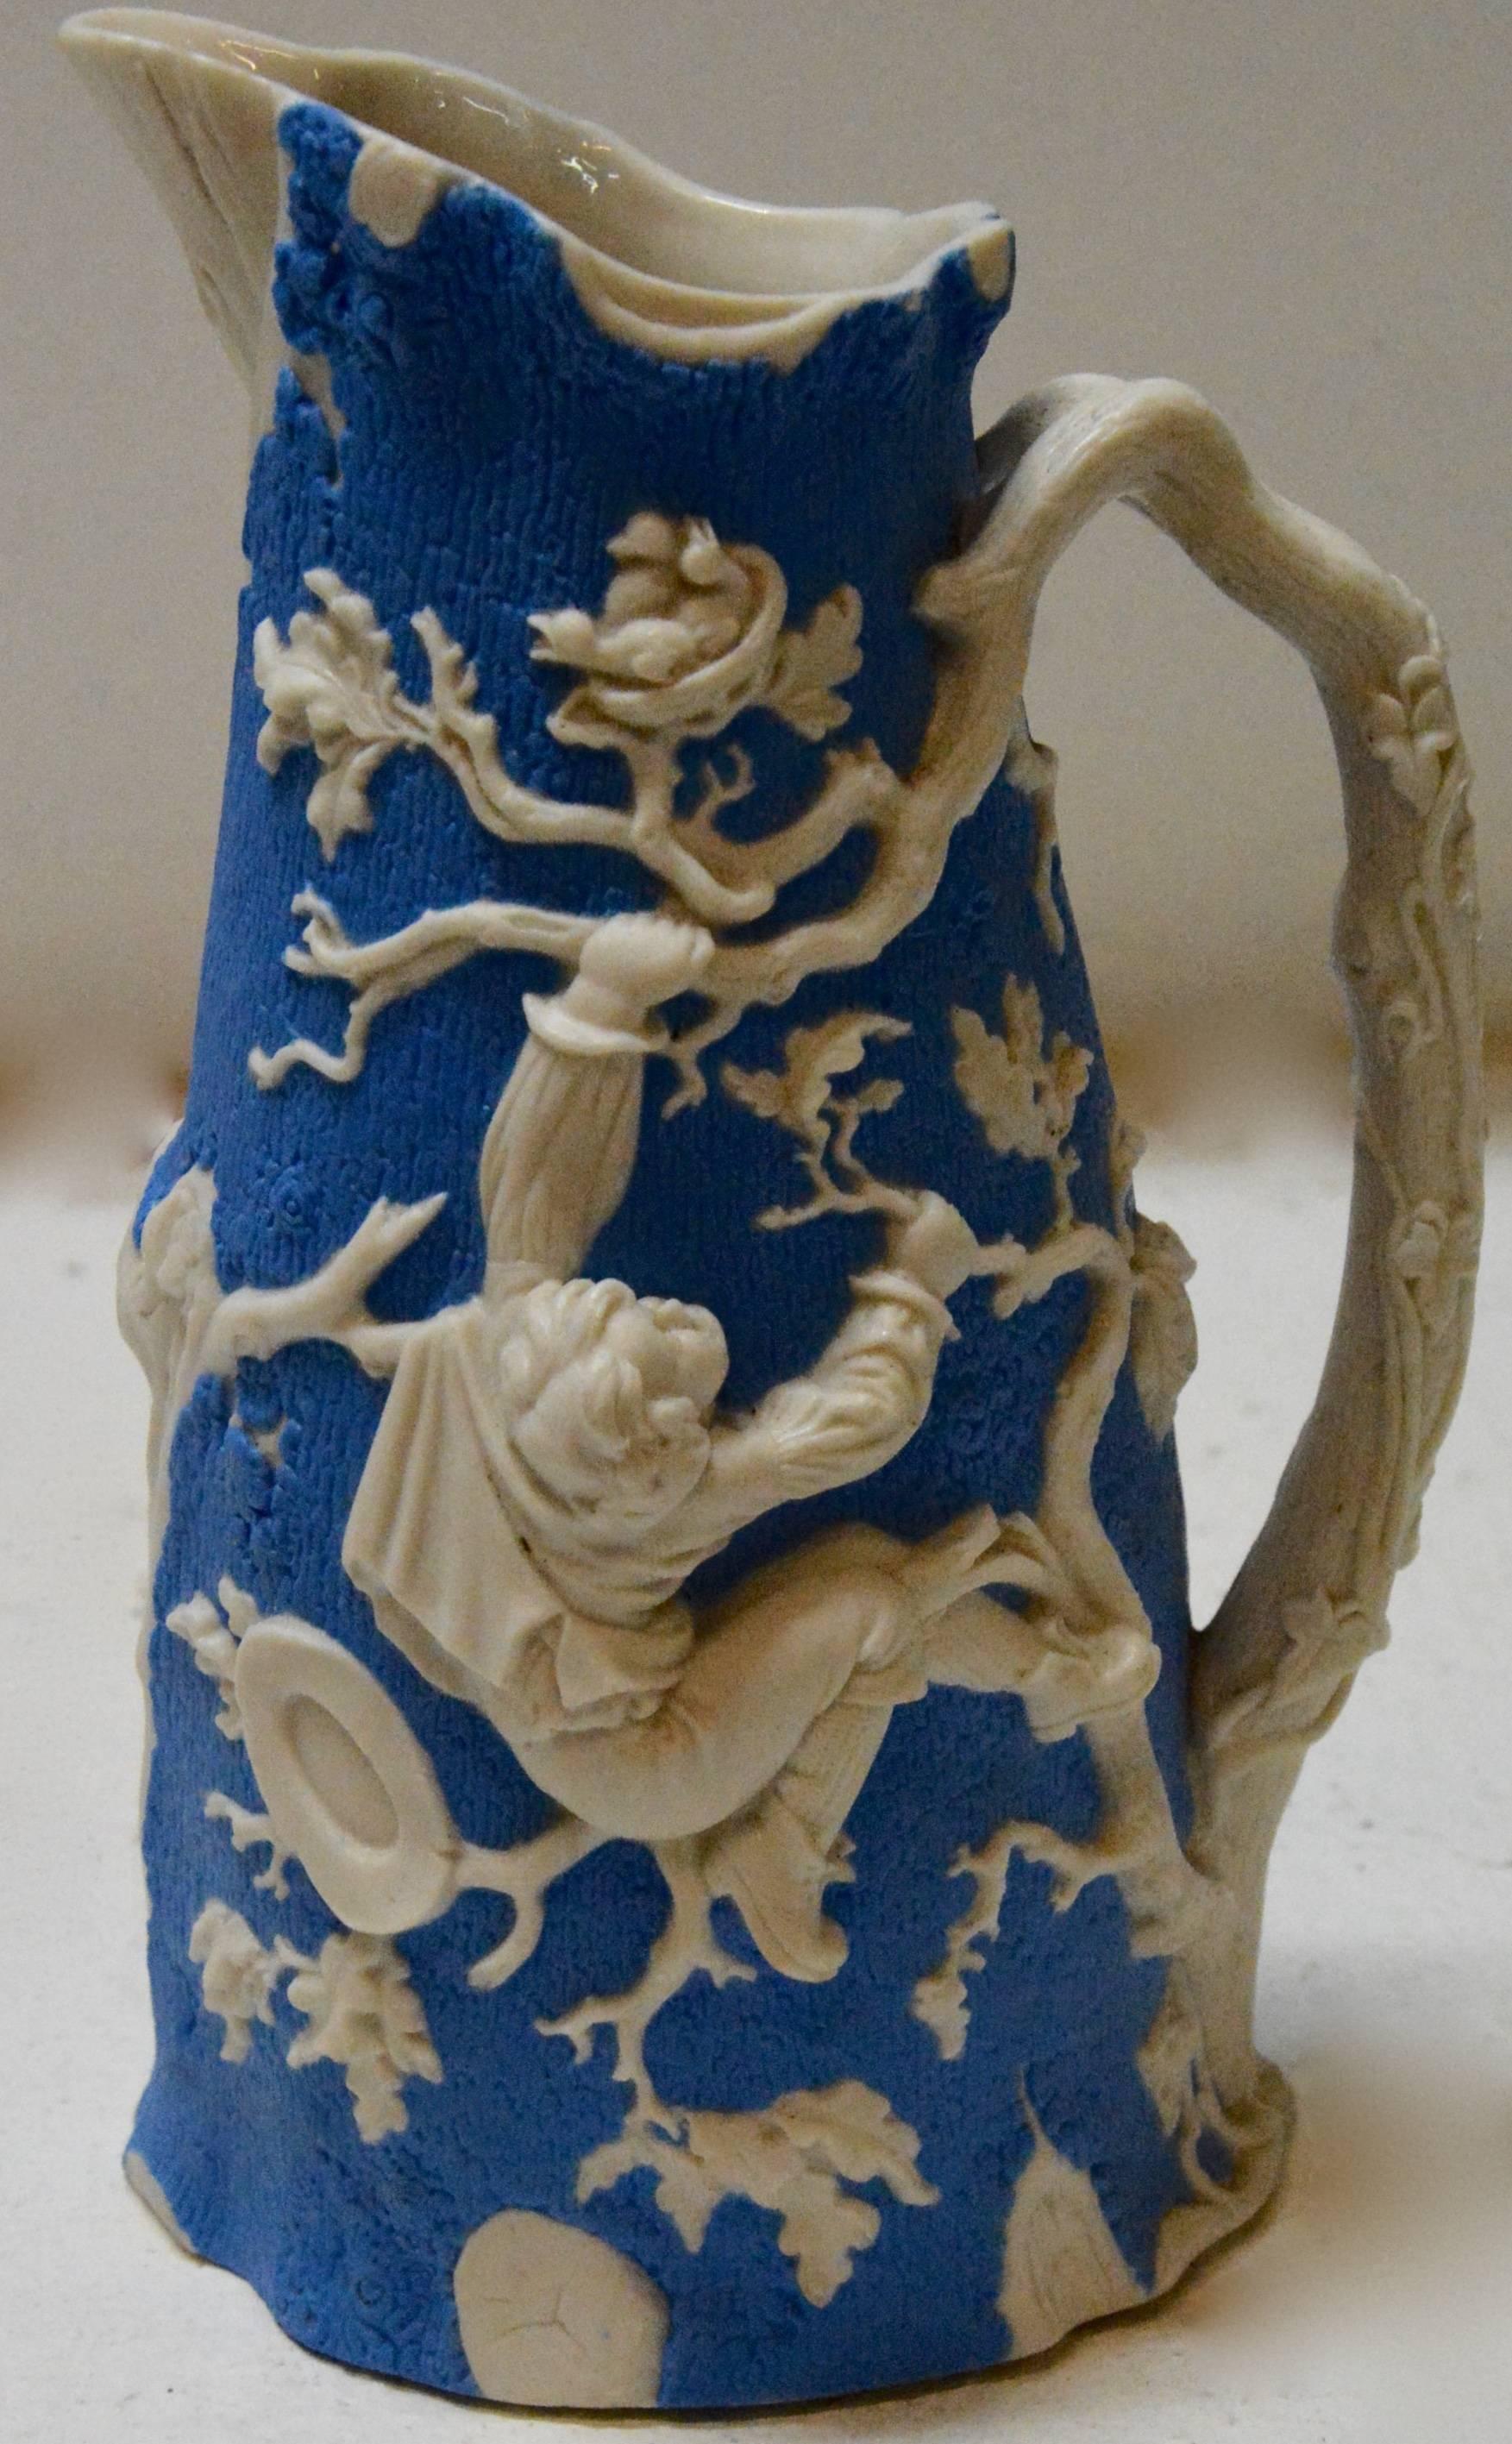 A beautiful molded earthenware pitcher made by the Jones and Walley Co. of Cobridge, Stoke-on-Trent, England. The piece features playful children play with birds. The vibrant blue and white are done in high relief with amazing details. The pitcher